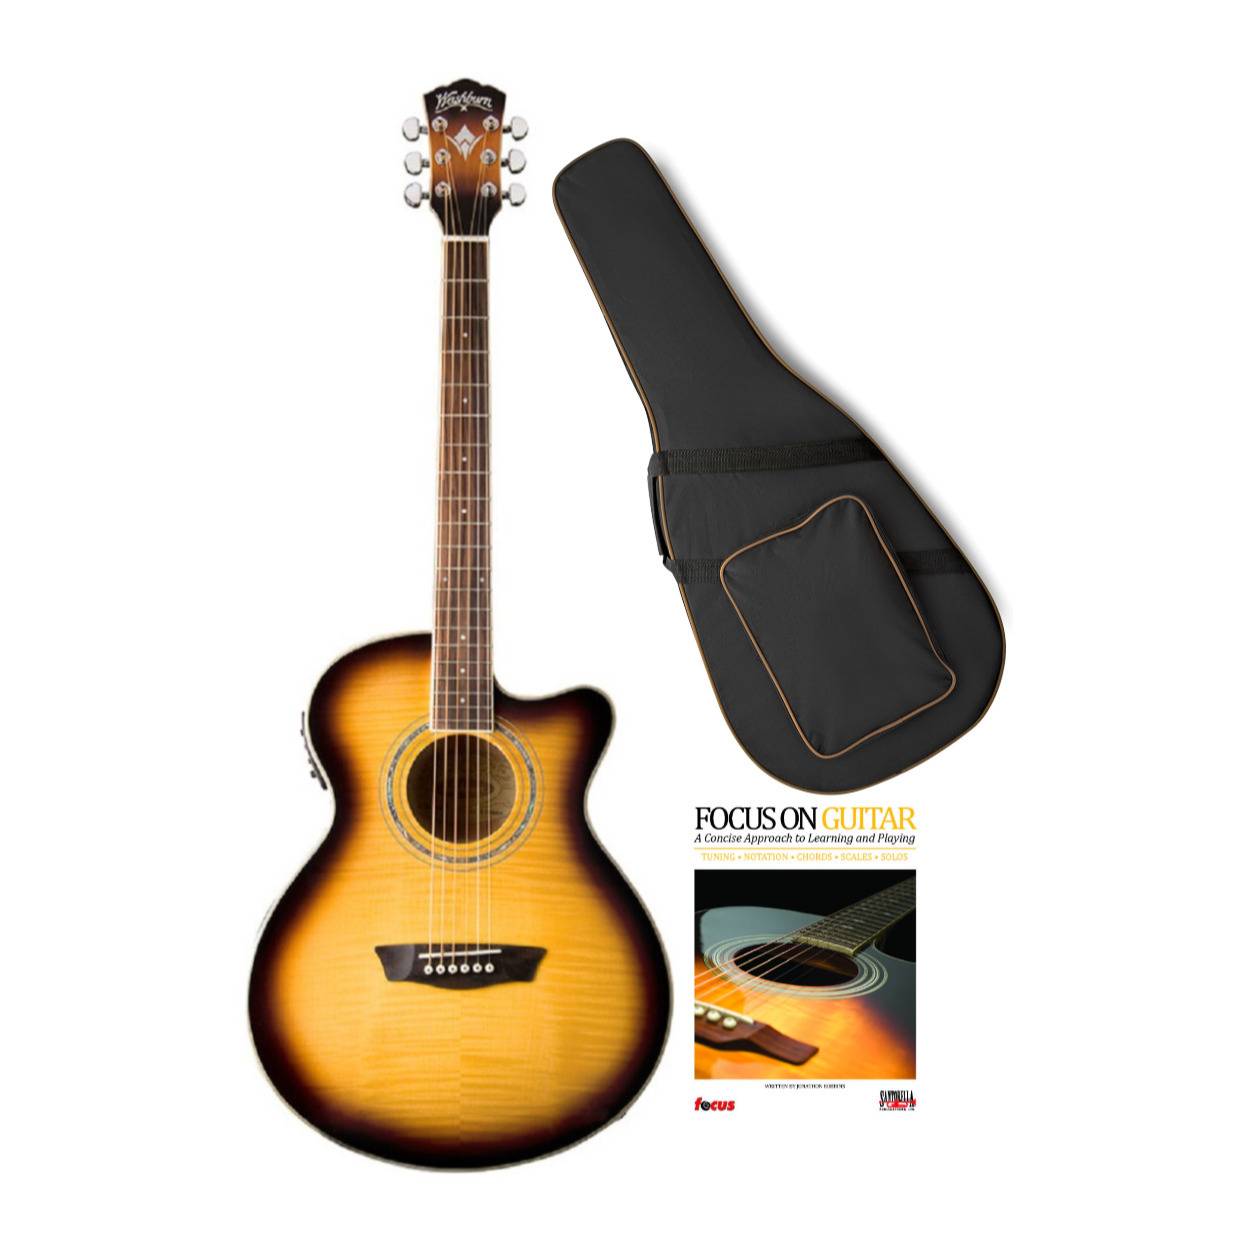 Washburn Festival EA15 Acoustic Electric Guitar (Right-Hand, Tobacco Burst) with Accessory Bundle